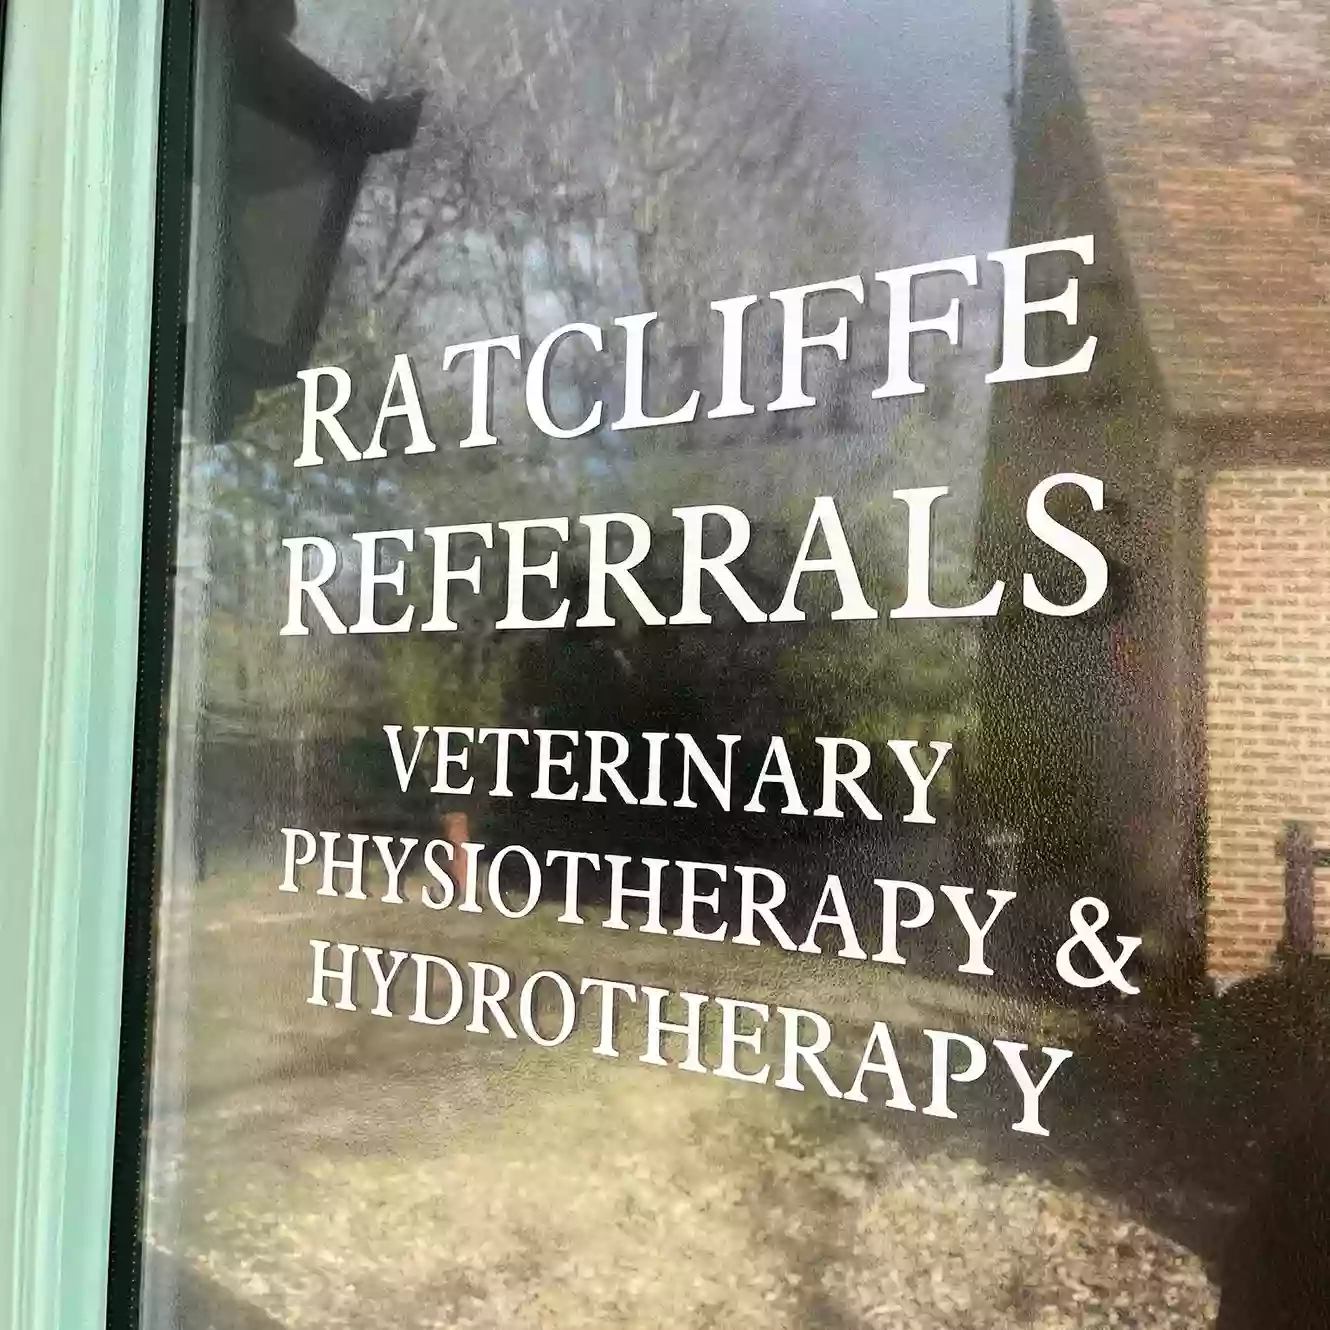 Ratcliffe Referrals Veterinary Physiotherapy and Hydrotherapy